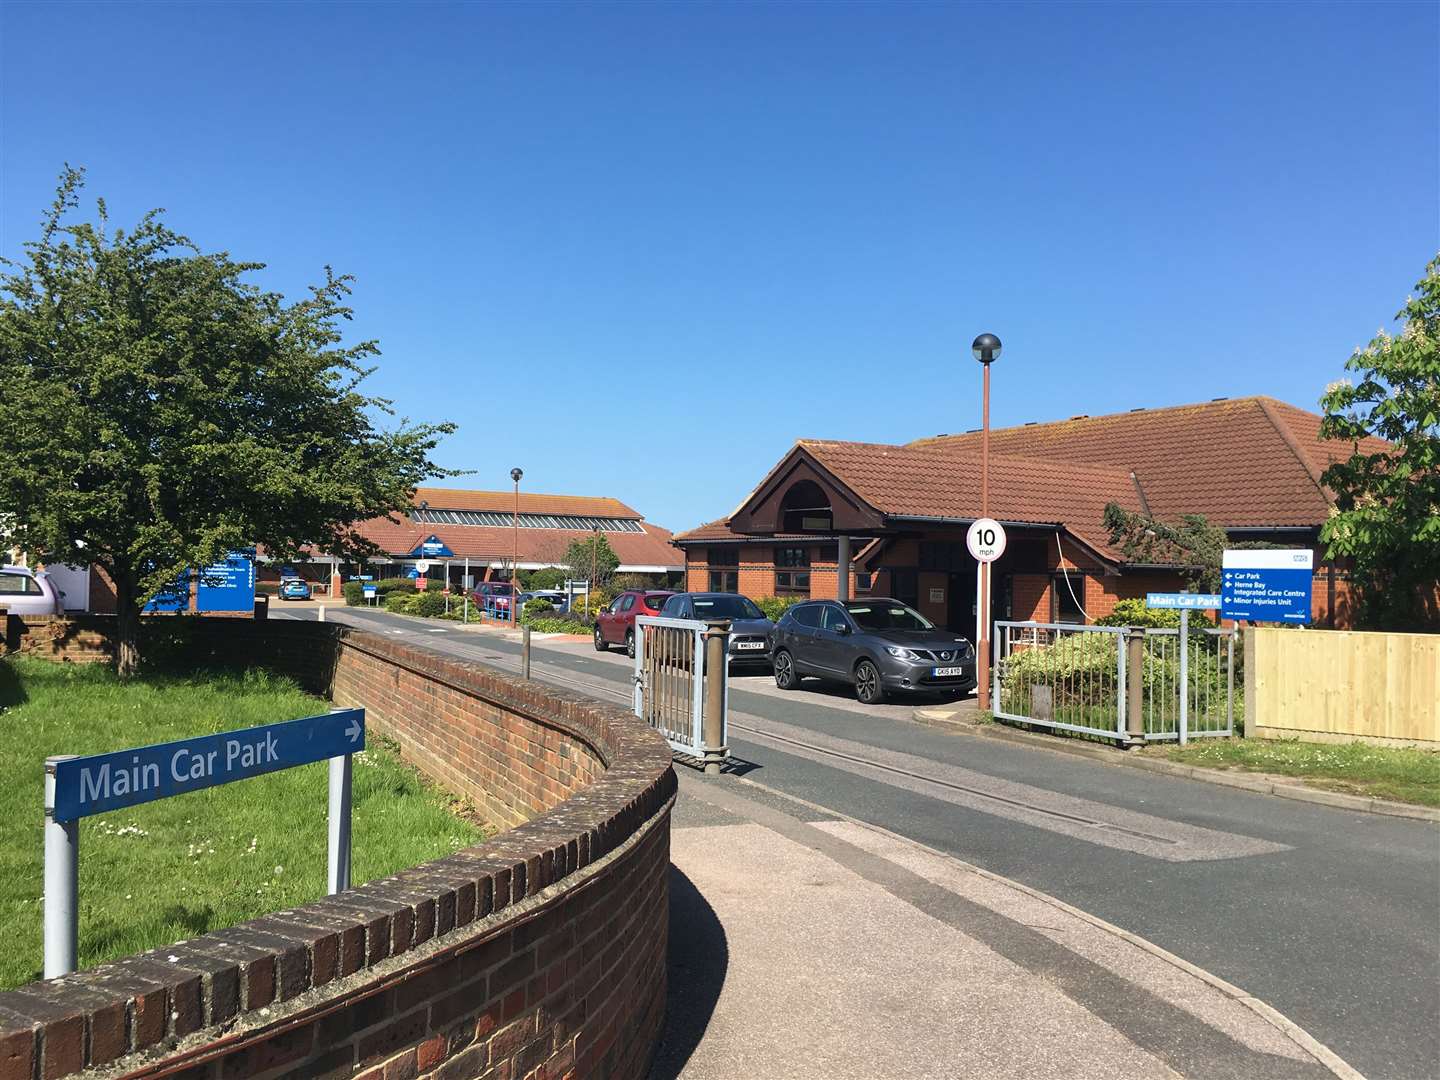 The incident happened in a vaccine clinic in the Queen Victoria Memorial Hospital in Herne Bay